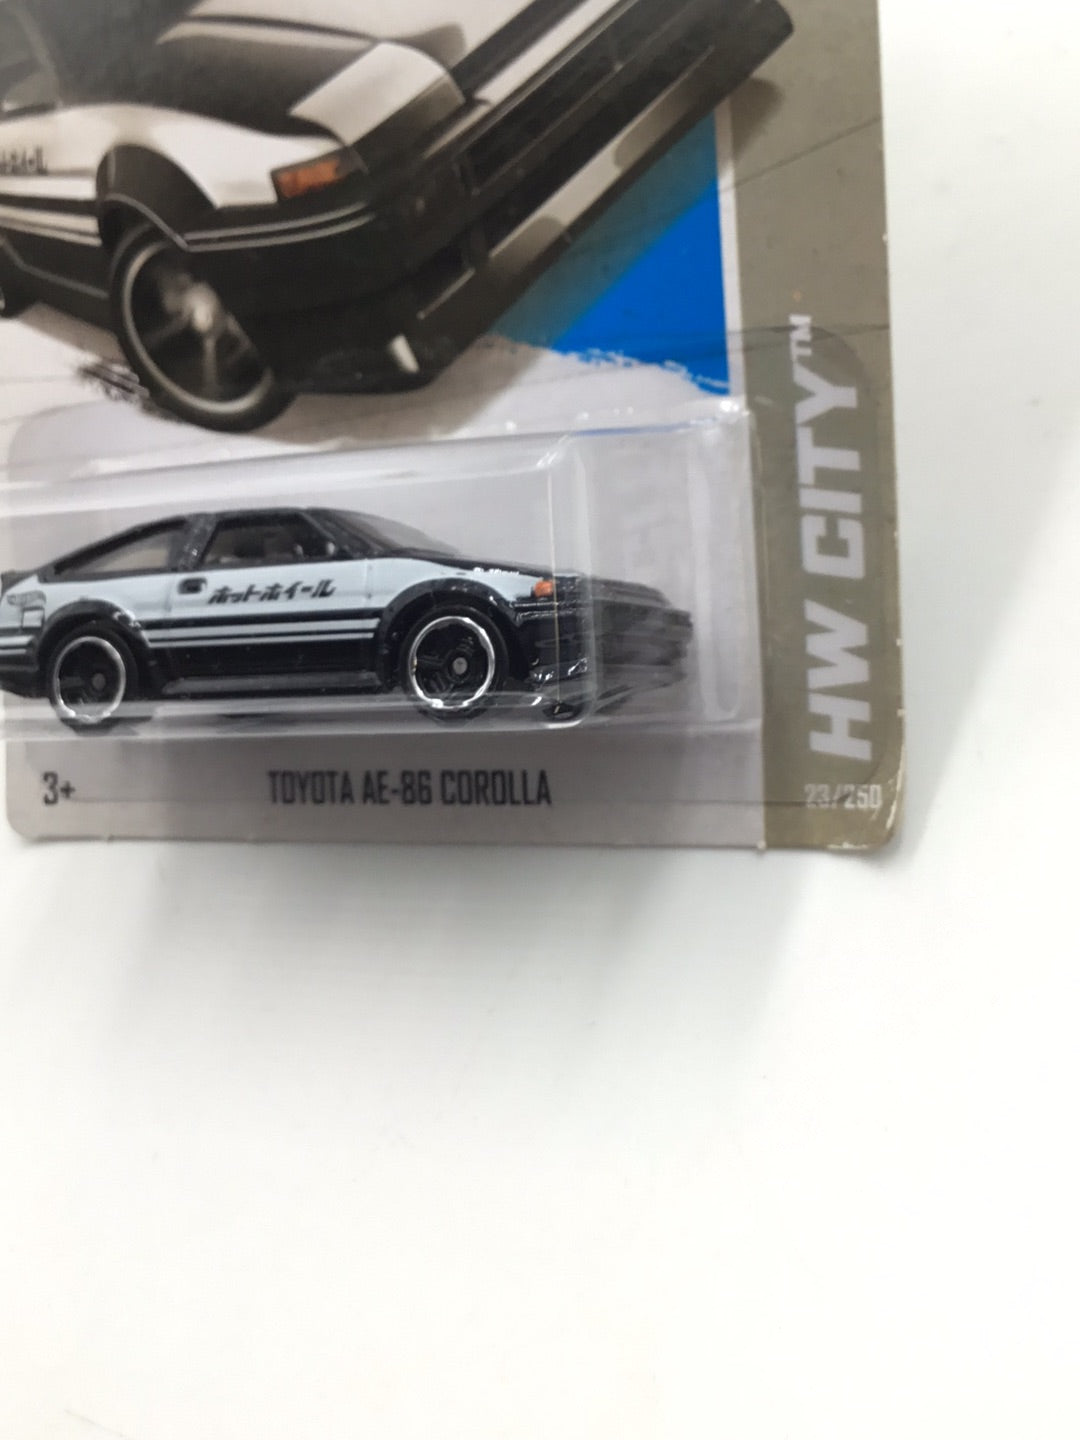 2013 hot wheels #23 Toyota AE 86 Corolla with protector